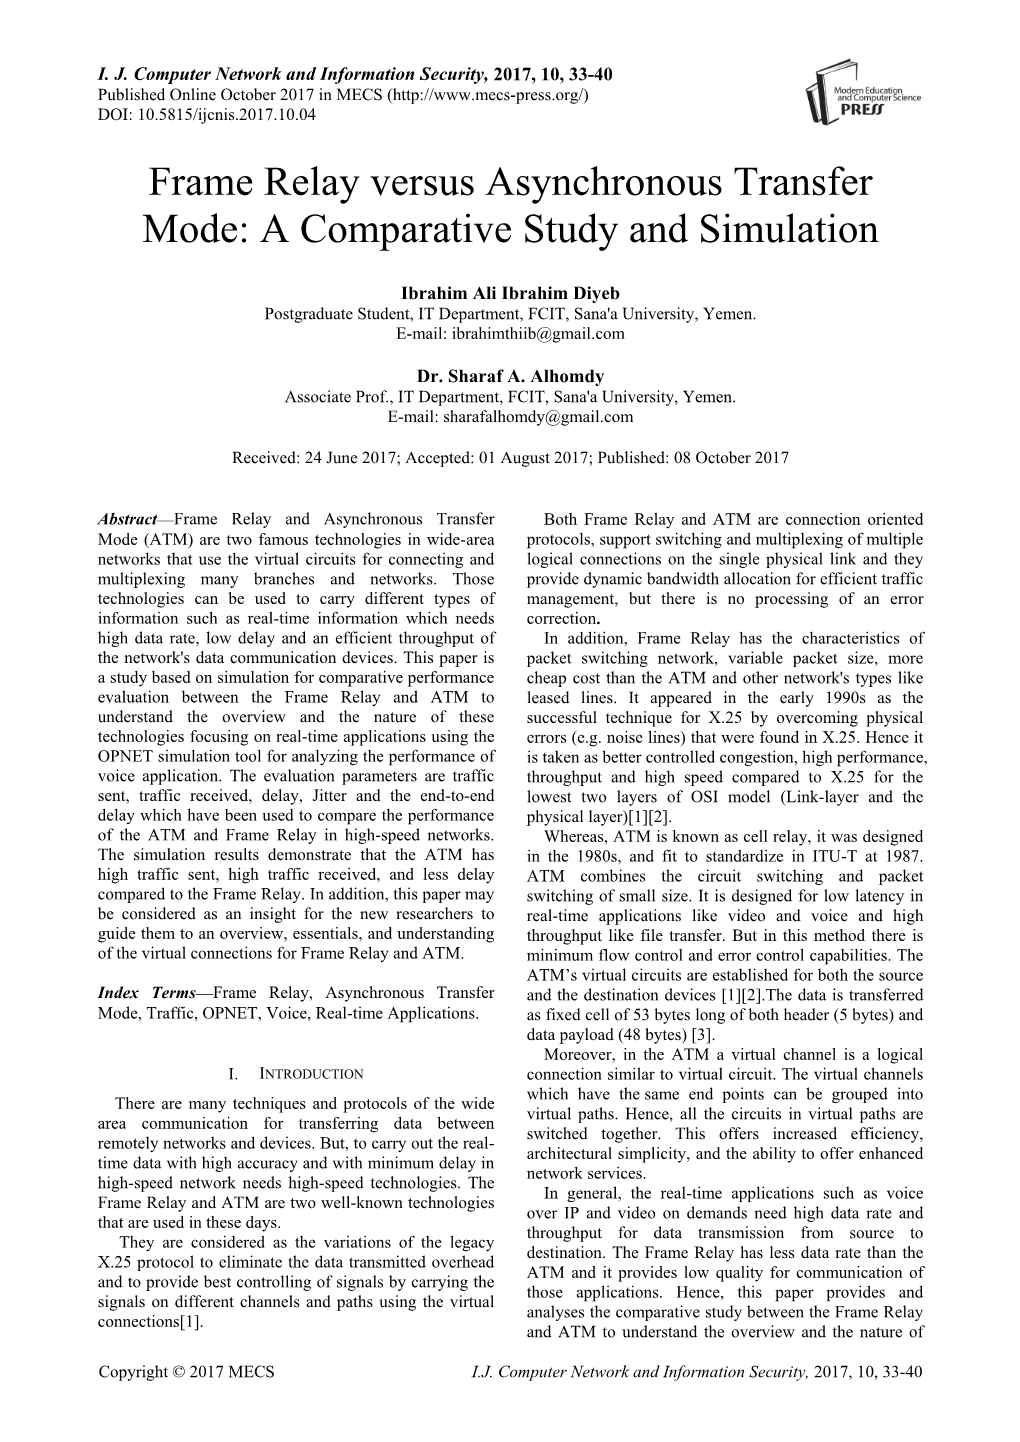 Frame Relay Versus Asynchronous Transfer Mode: a Comparative Study and Simulation